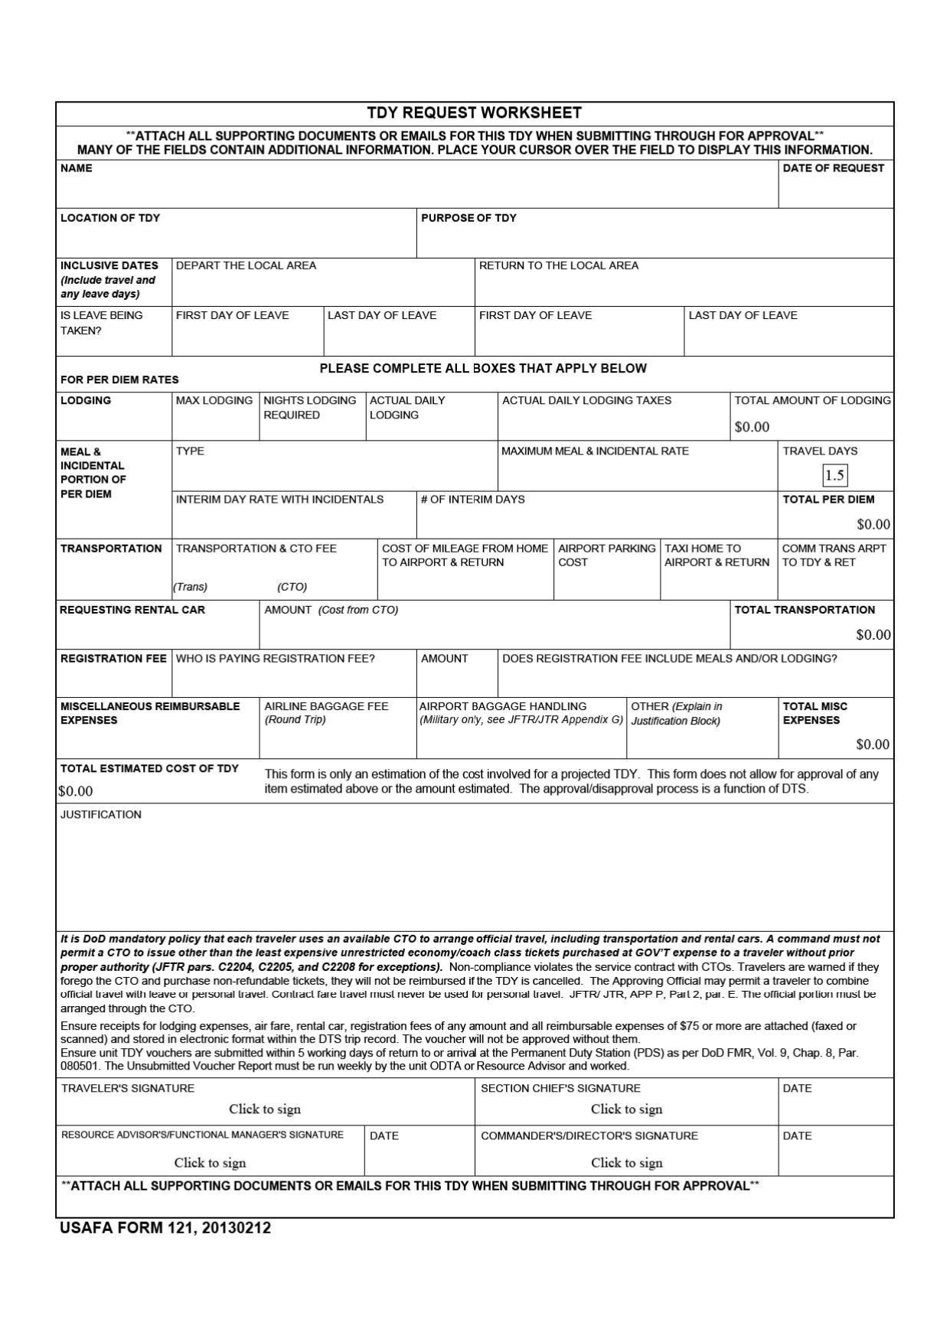 USAFA Form 121 TDY Request Worksheet, Page 1